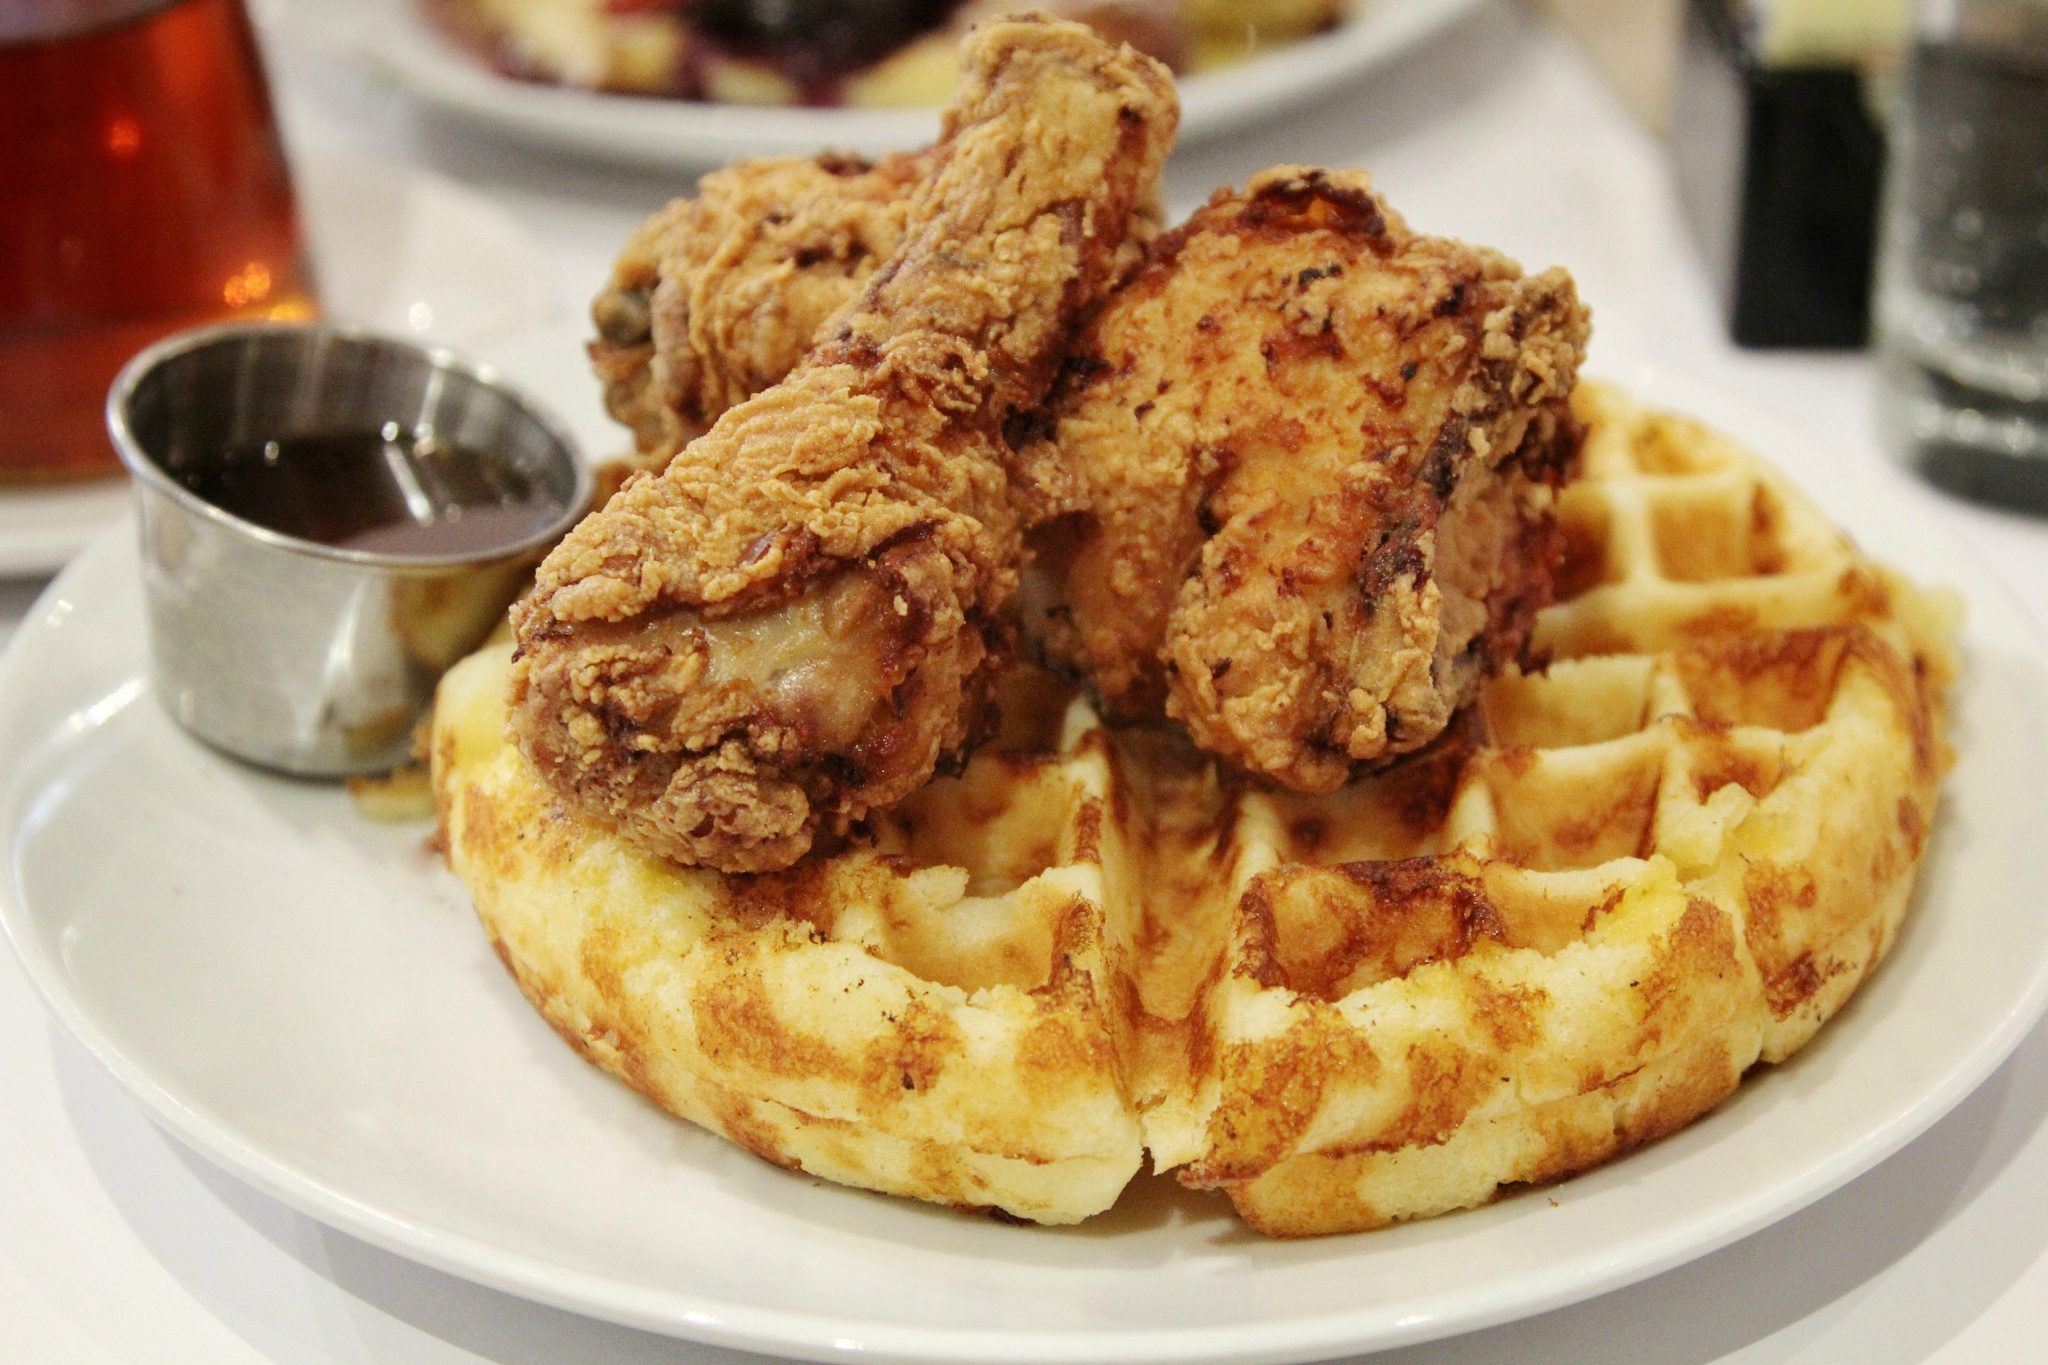 Chicken and Waffles Brunch at Friedman’s in New York City